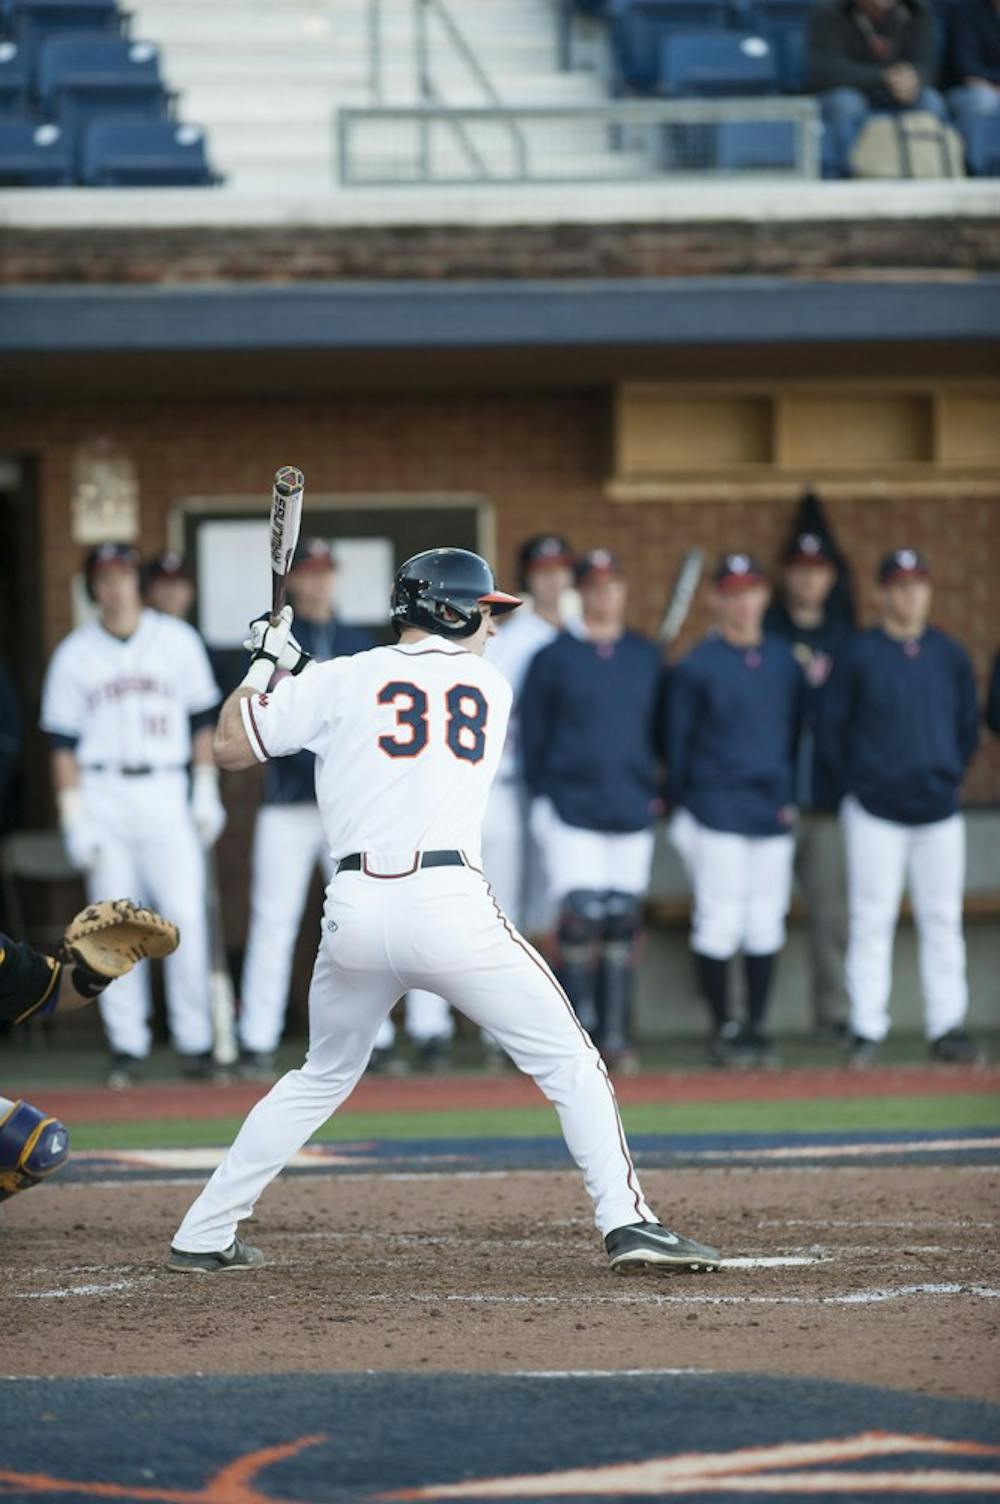 	<p>Junior first baseman Mike Papi hit his ninth and tenth home runs of the year as Virginia lost an <span class="caps">ACC</span> series for the first time all season. His longball total leads the conference. </p>